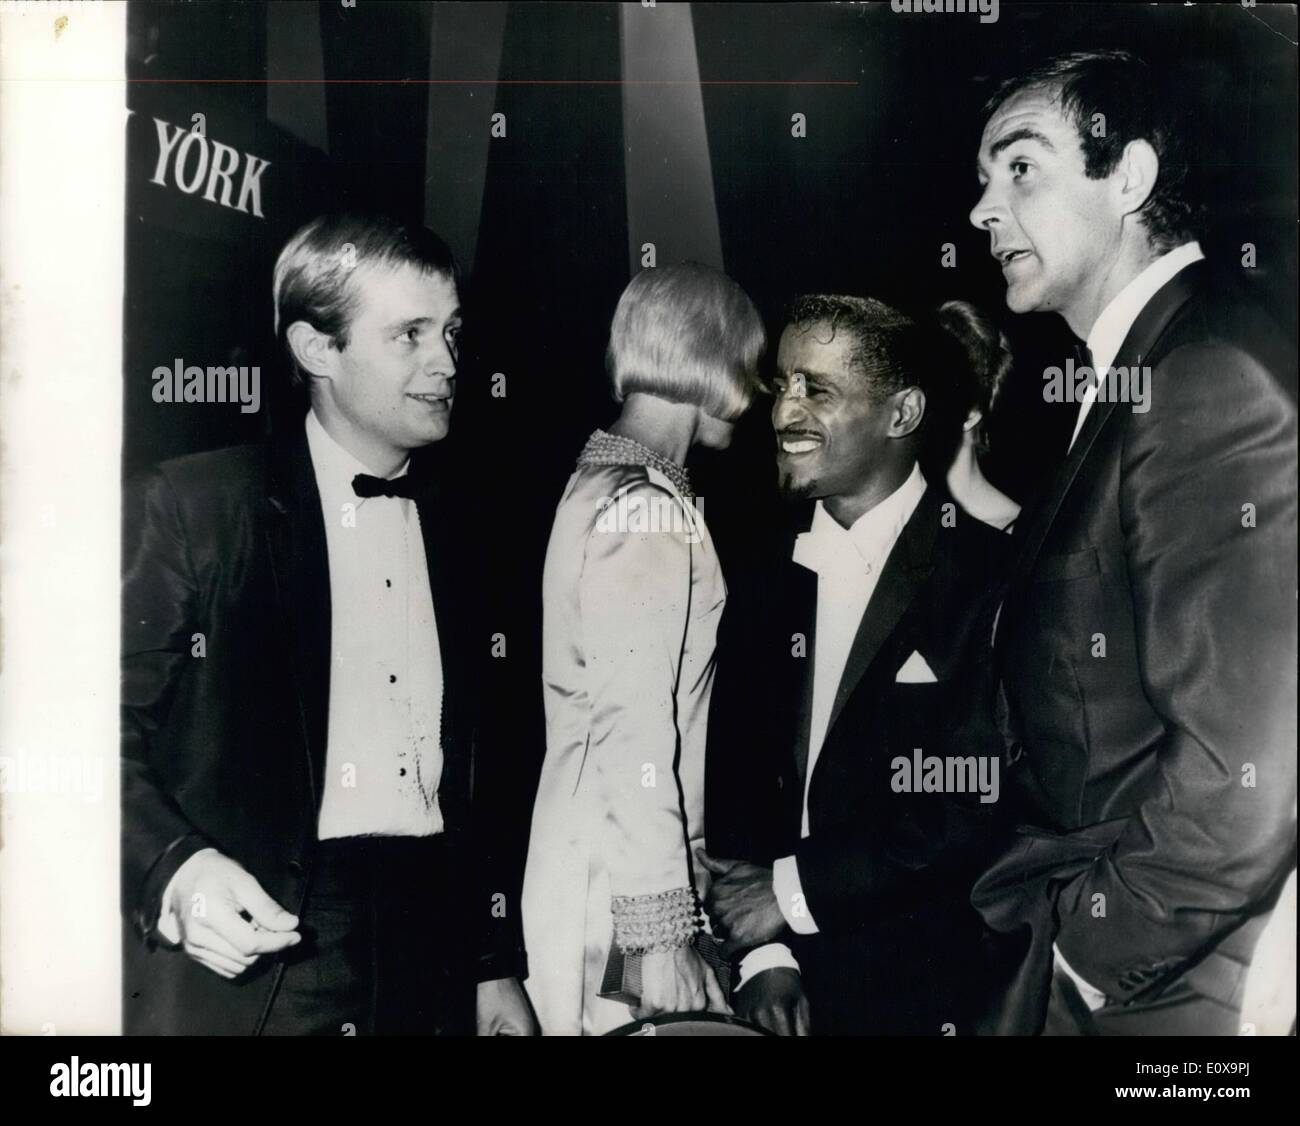 Oct. 10, 1965 - Famous Film Stars Get Together At A New York Party- Photo Shows: (L. to R.) David McCallum, Saqmmy Davis Jr., and Sean Connery pictured at the Hilton Hotel in New York when they attended a party that attracted many movie and broadway notables. In the background May Britt (mrs. Sammy Davis). 2009/J. Keystone Stock Photo